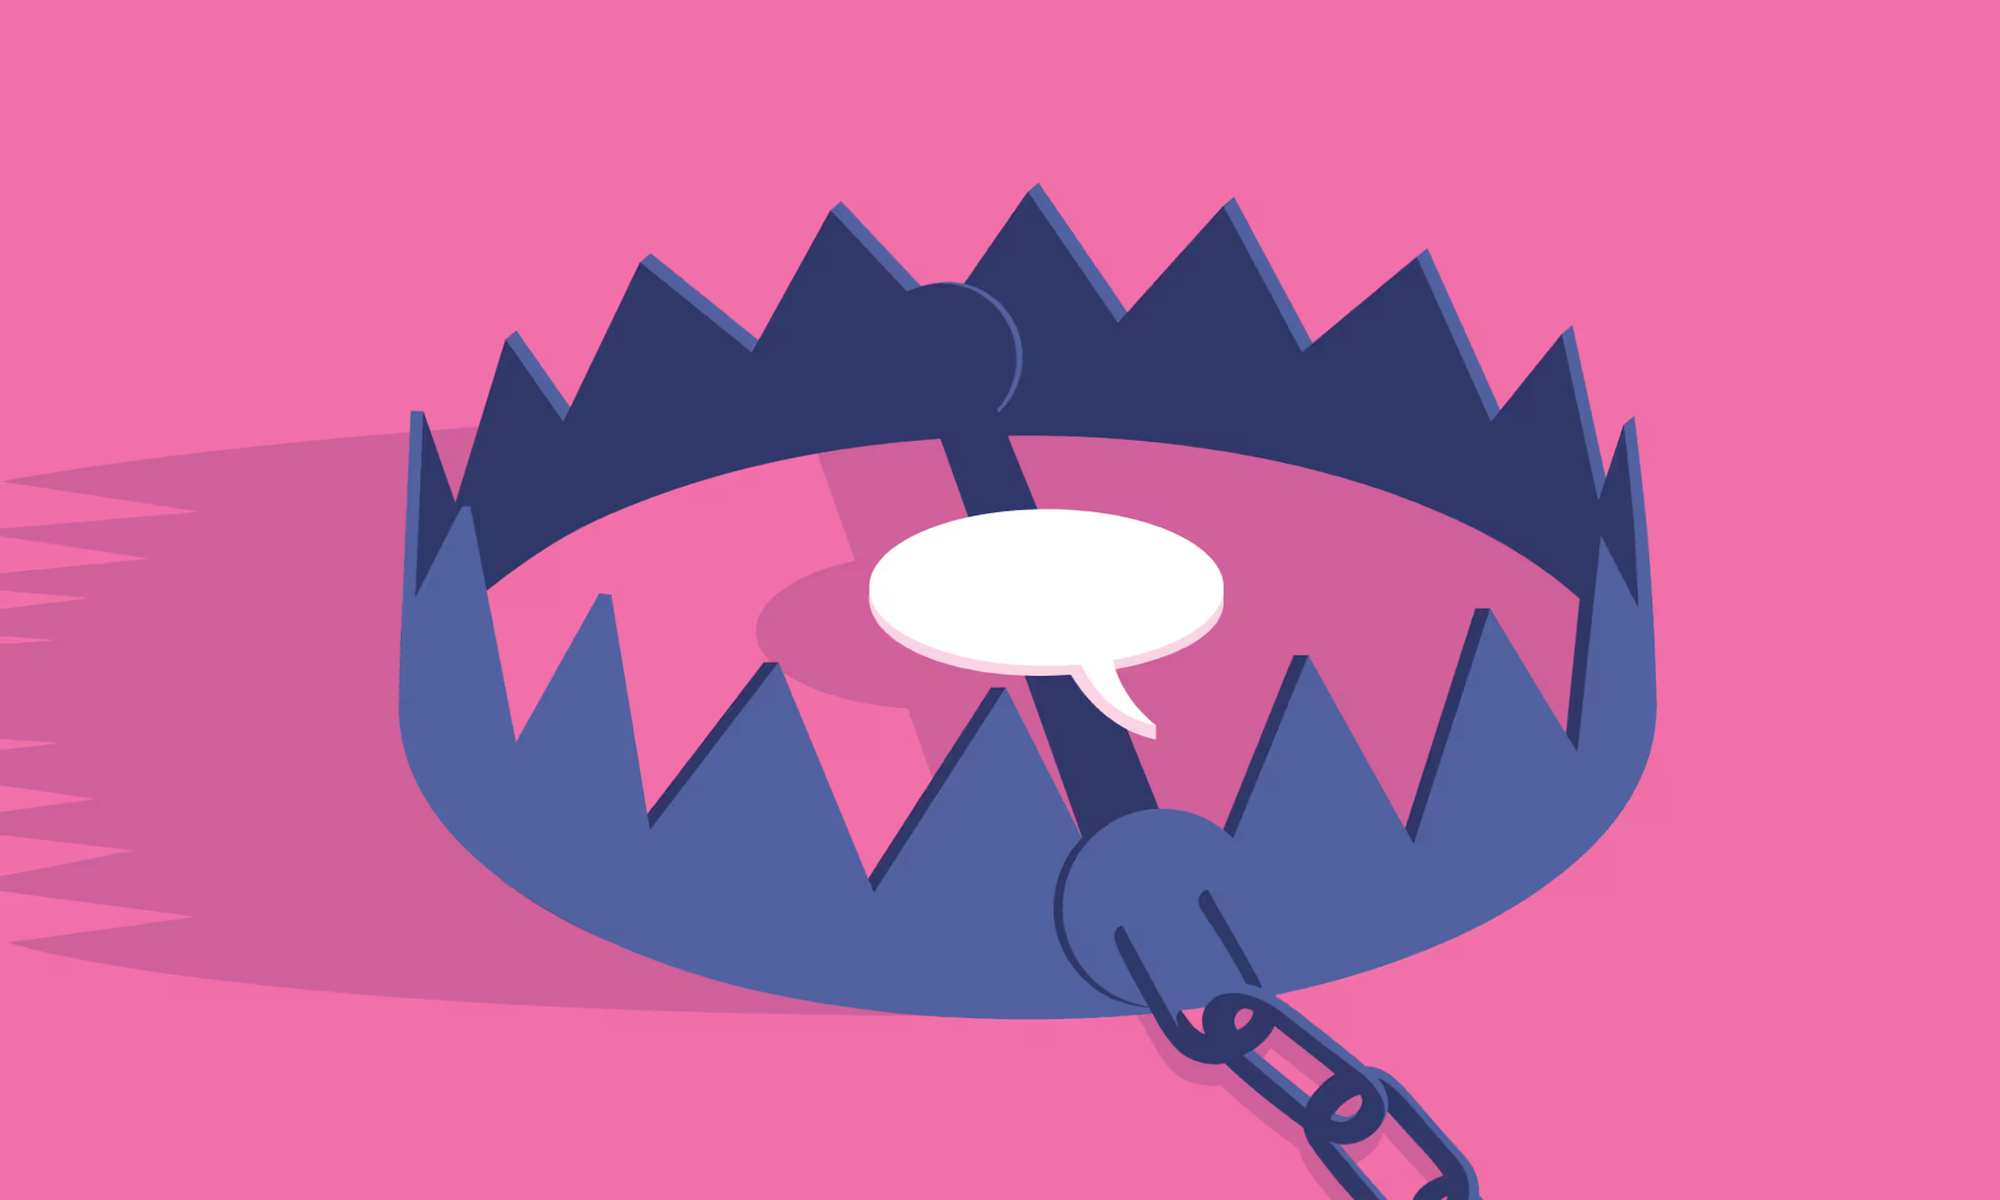 Illustration of a bear trap, with a speech bubble placed at the center of the trap.